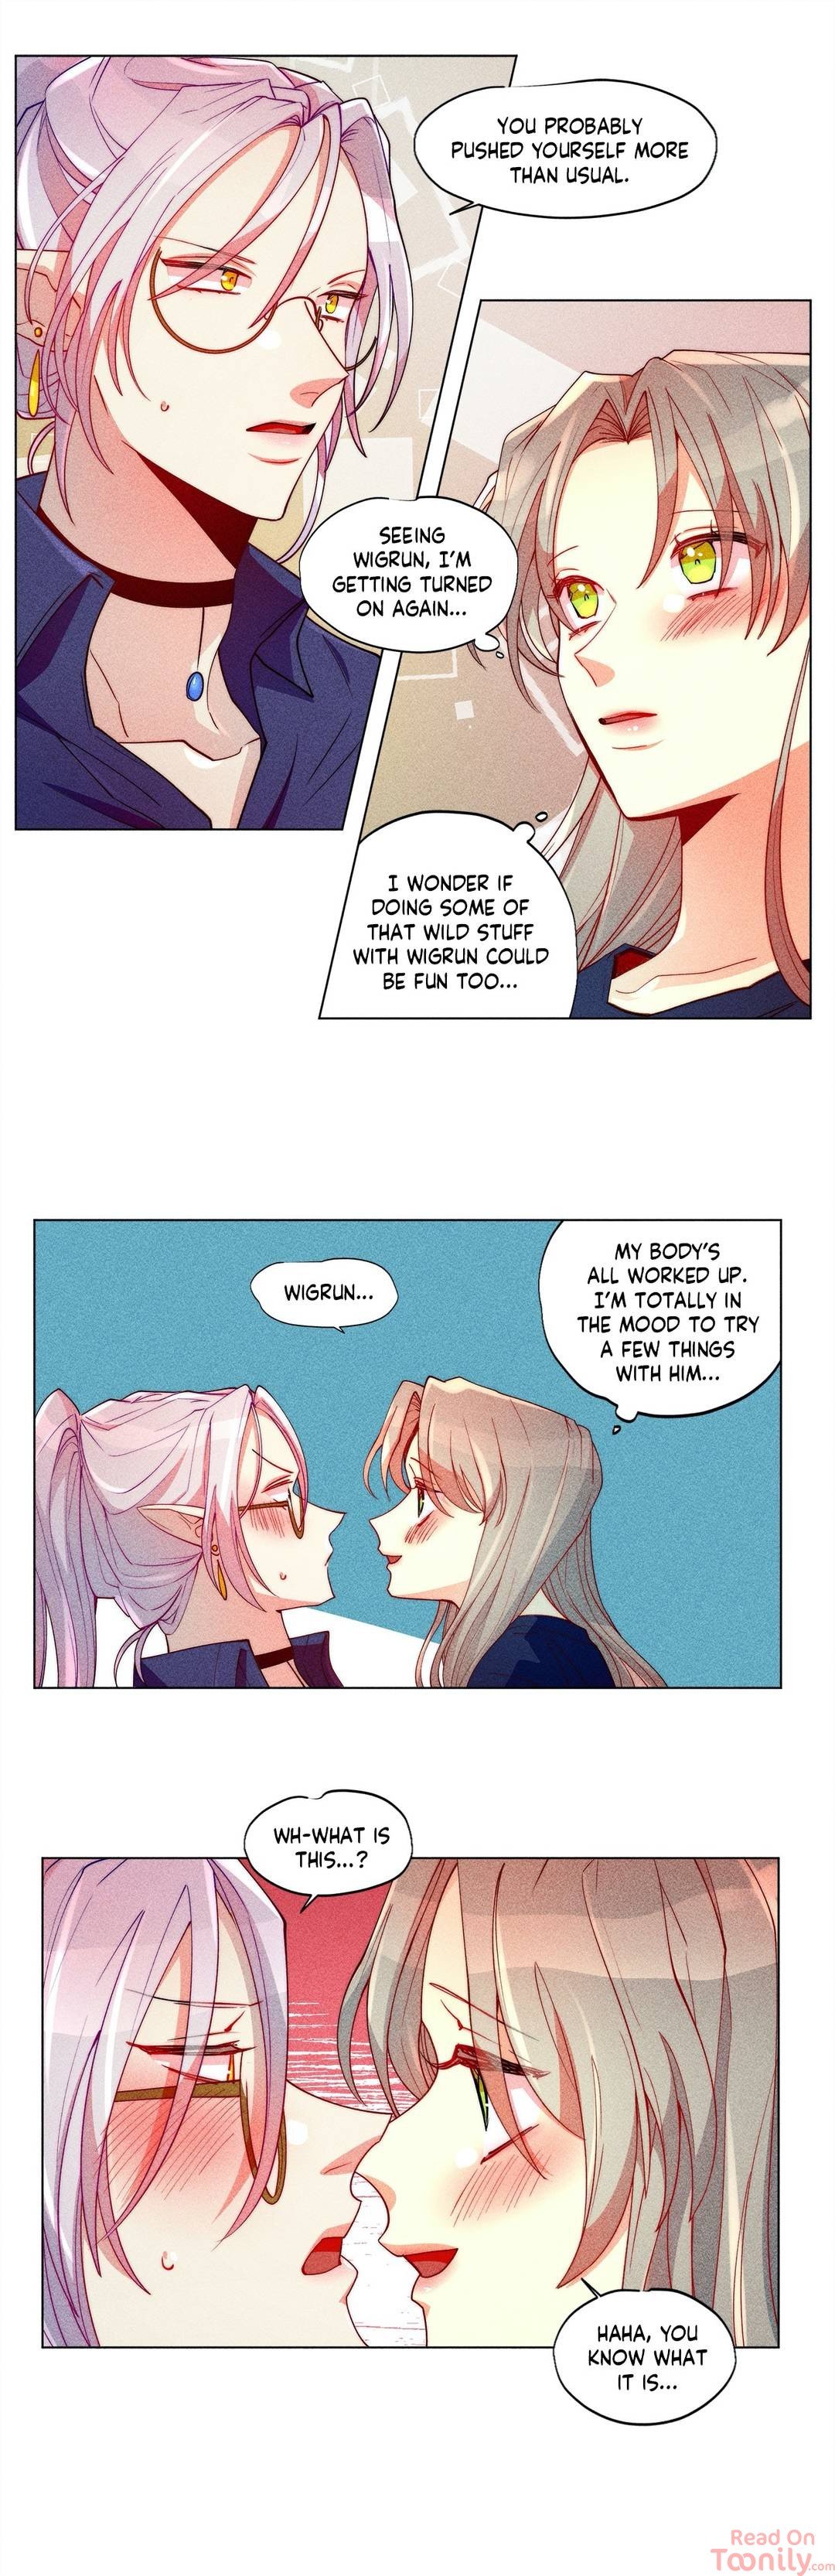 the-virgin-witch-chap-23-20